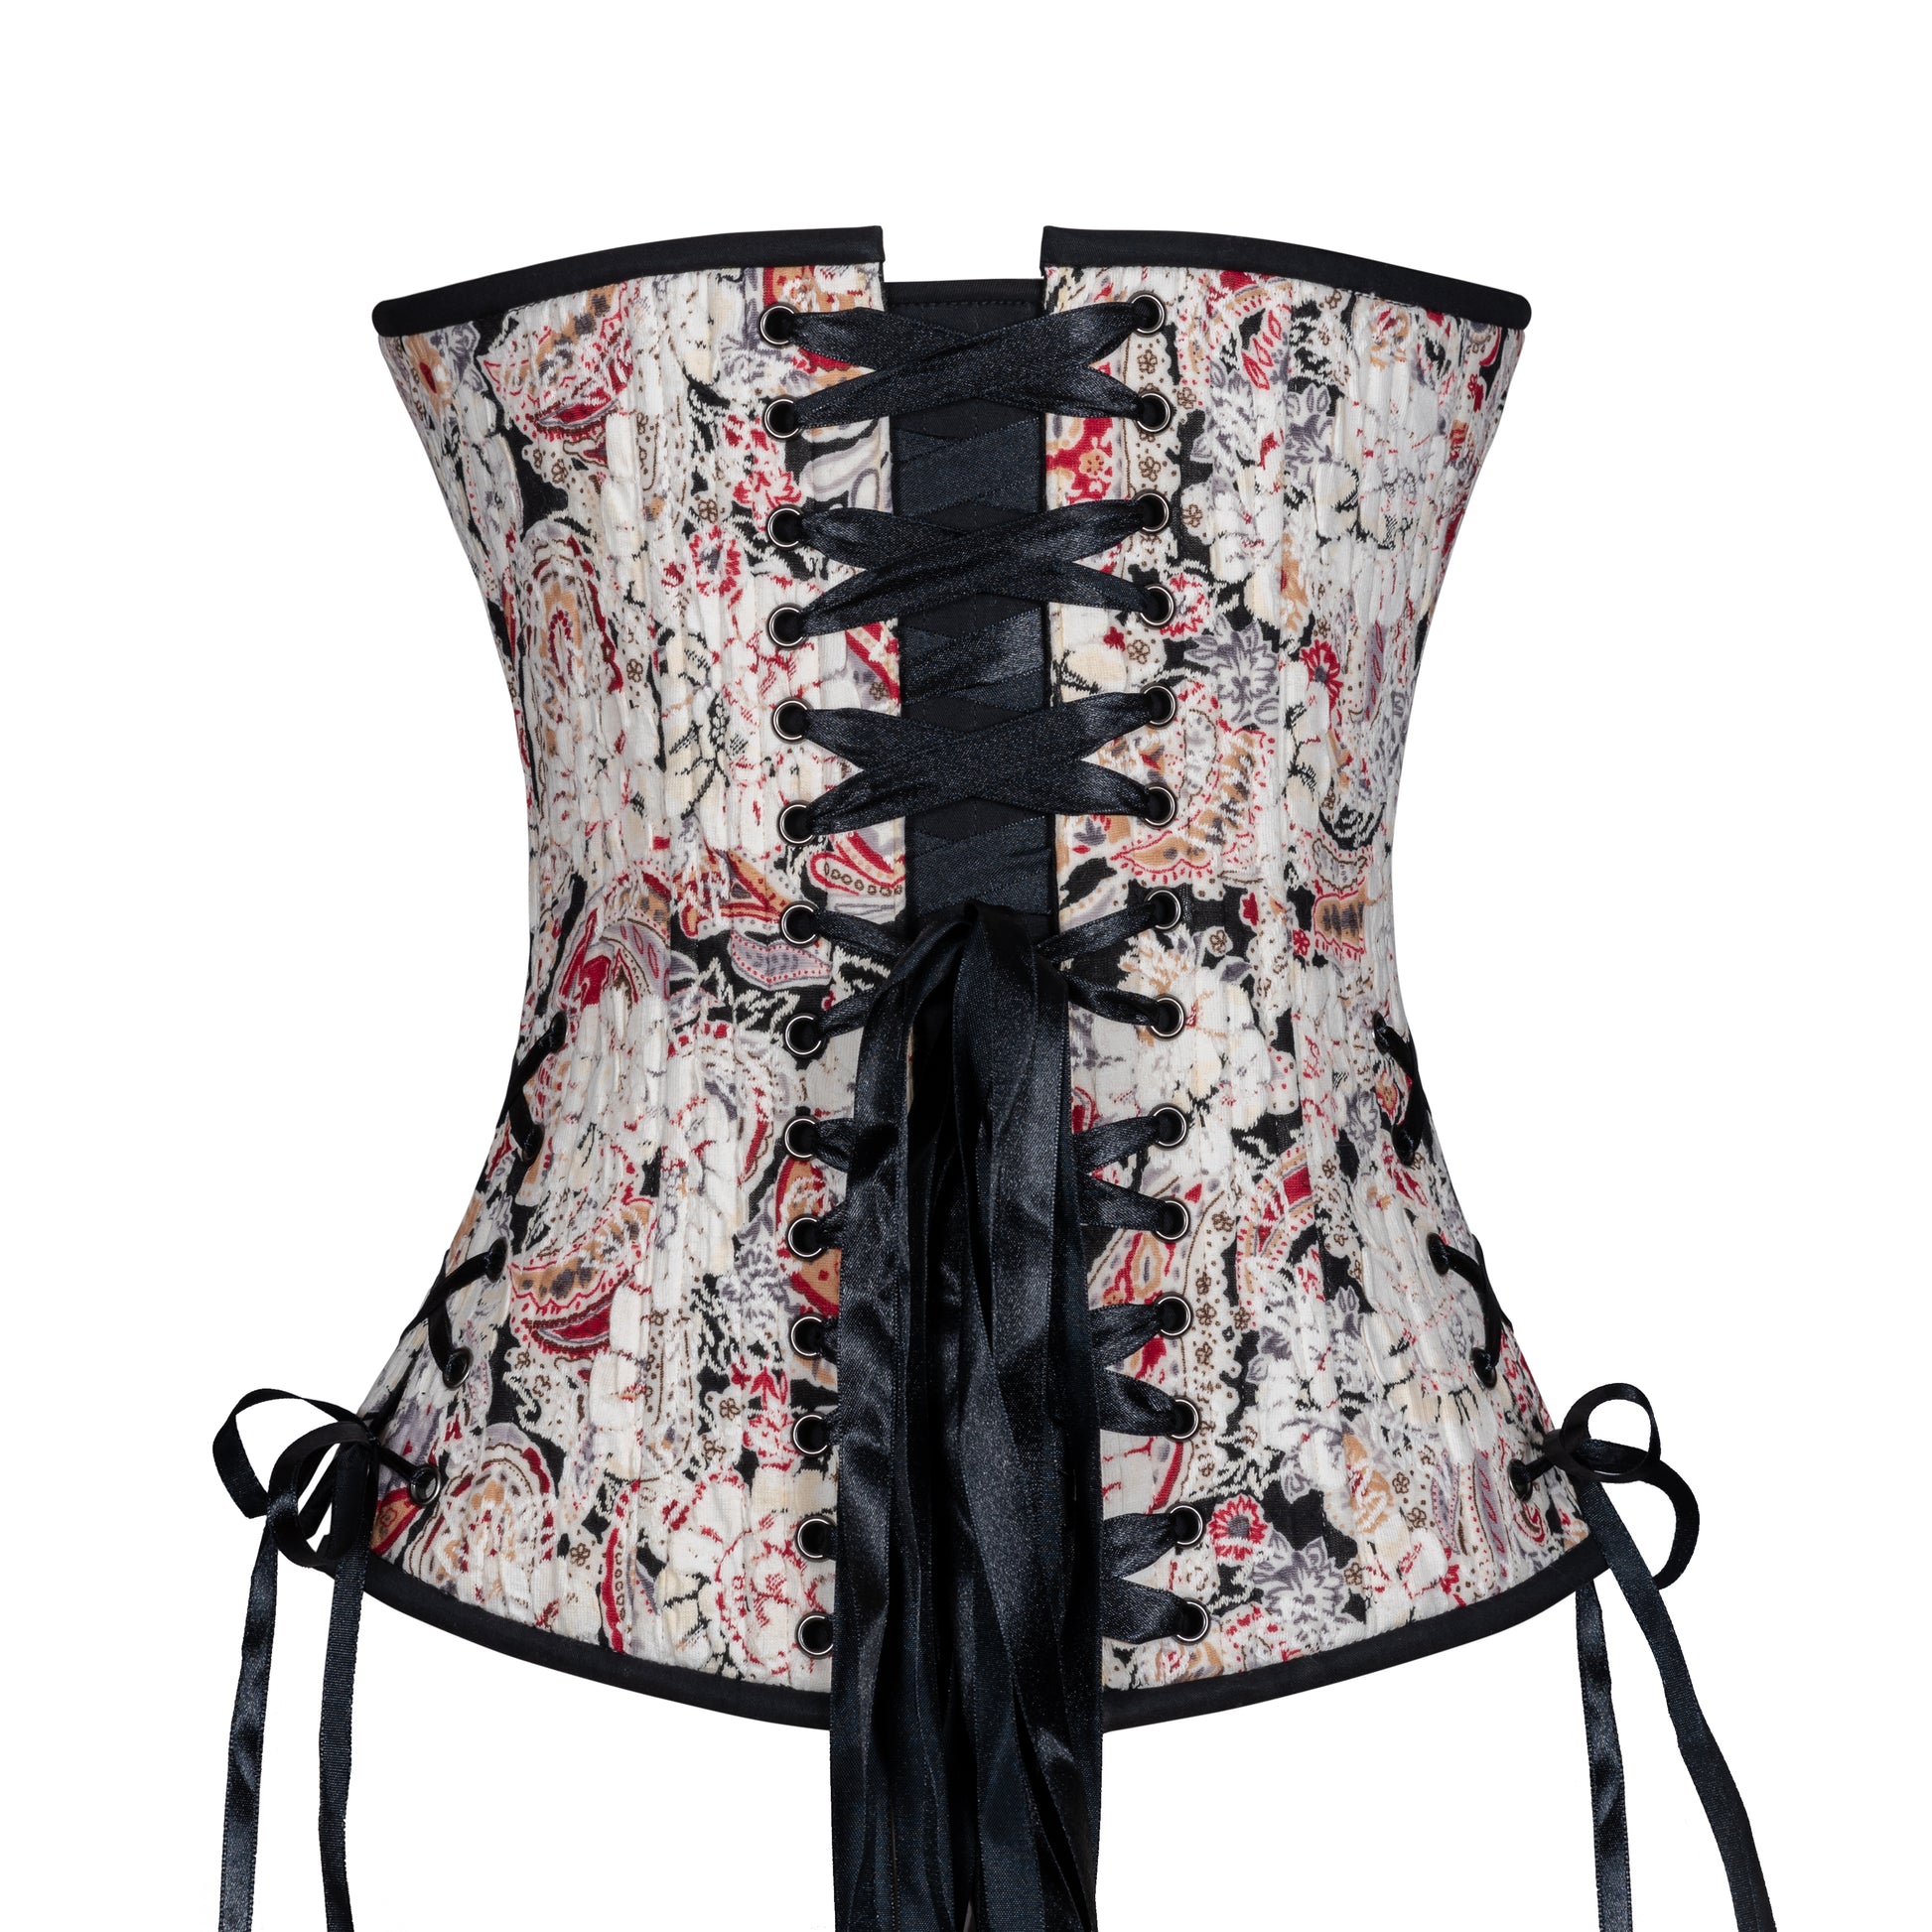 Shop Overbust Black Corset from here at Affordable Price